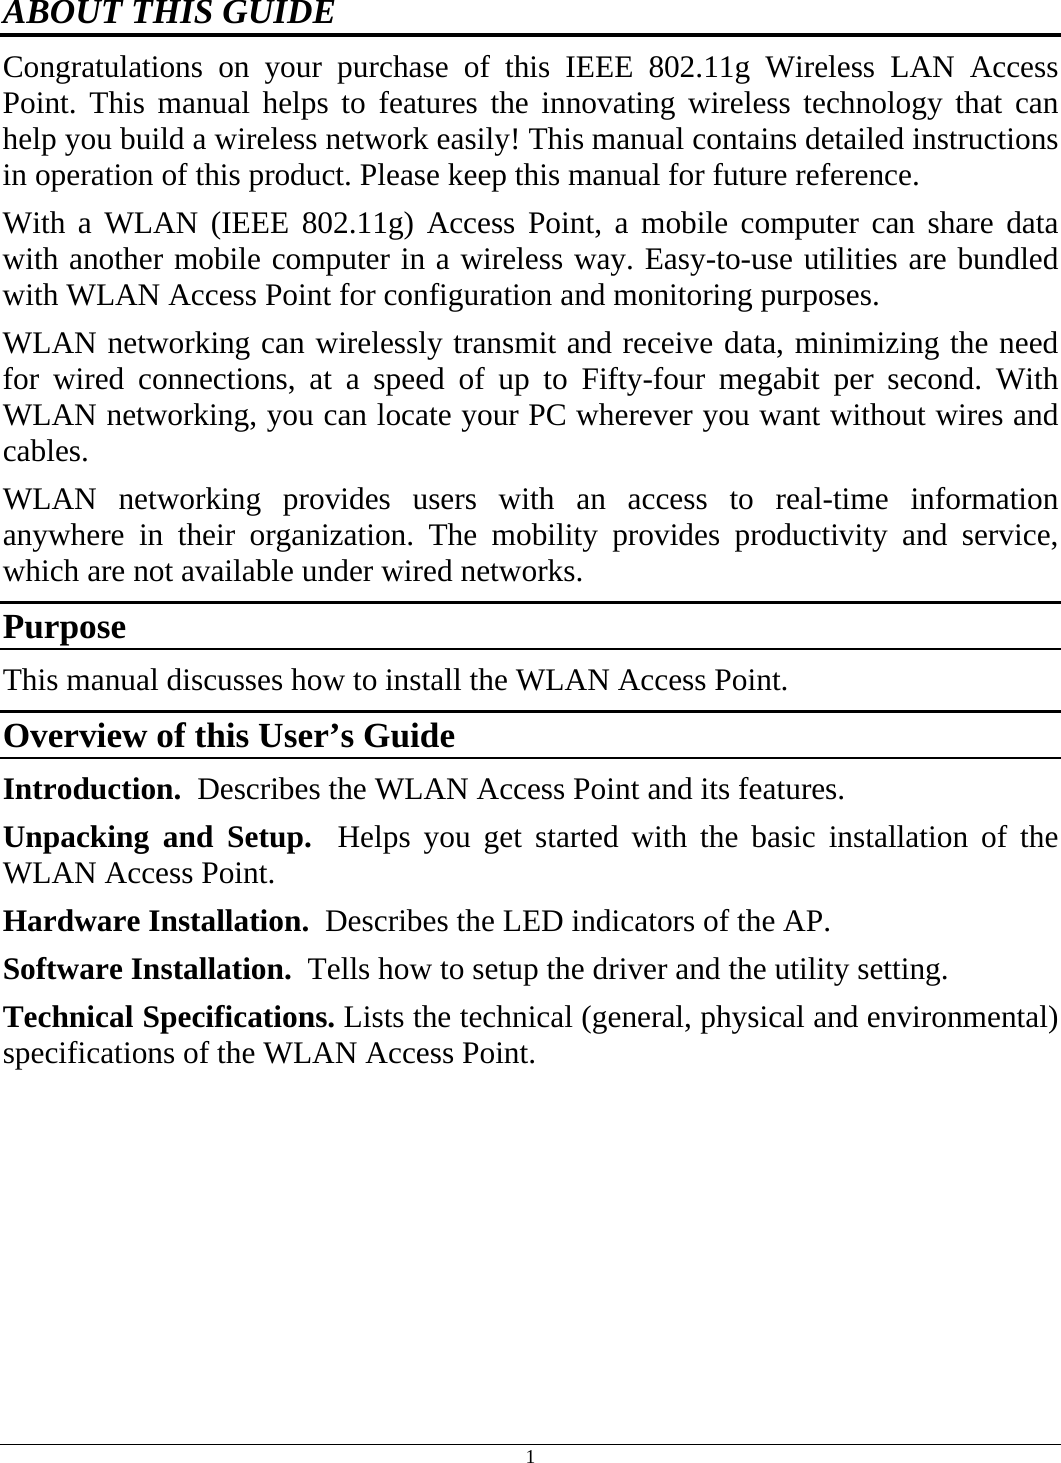 1 ABOUT THIS GUIDE Congratulations on your purchase of this IEEE 802.11g Wireless LAN Access Point. This manual helps to features the innovating wireless technology that can help you build a wireless network easily! This manual contains detailed instructions in operation of this product. Please keep this manual for future reference. With a WLAN (IEEE 802.11g) Access Point, a mobile computer can share data with another mobile computer in a wireless way. Easy-to-use utilities are bundled with WLAN Access Point for configuration and monitoring purposes.  WLAN networking can wirelessly transmit and receive data, minimizing the need for wired connections, at a speed of up to Fifty-four megabit per second. With WLAN networking, you can locate your PC wherever you want without wires and cables. WLAN networking provides users with an access to real-time information anywhere in their organization. The mobility provides productivity and service, which are not available under wired networks.  Purpose This manual discusses how to install the WLAN Access Point.  Overview of this User’s Guide Introduction.  Describes the WLAN Access Point and its features. Unpacking and Setup.  Helps you get started with the basic installation of the WLAN Access Point. Hardware Installation.  Describes the LED indicators of the AP. Software Installation.  Tells how to setup the driver and the utility setting. Technical Specifications. Lists the technical (general, physical and environmental) specifications of the WLAN Access Point. 